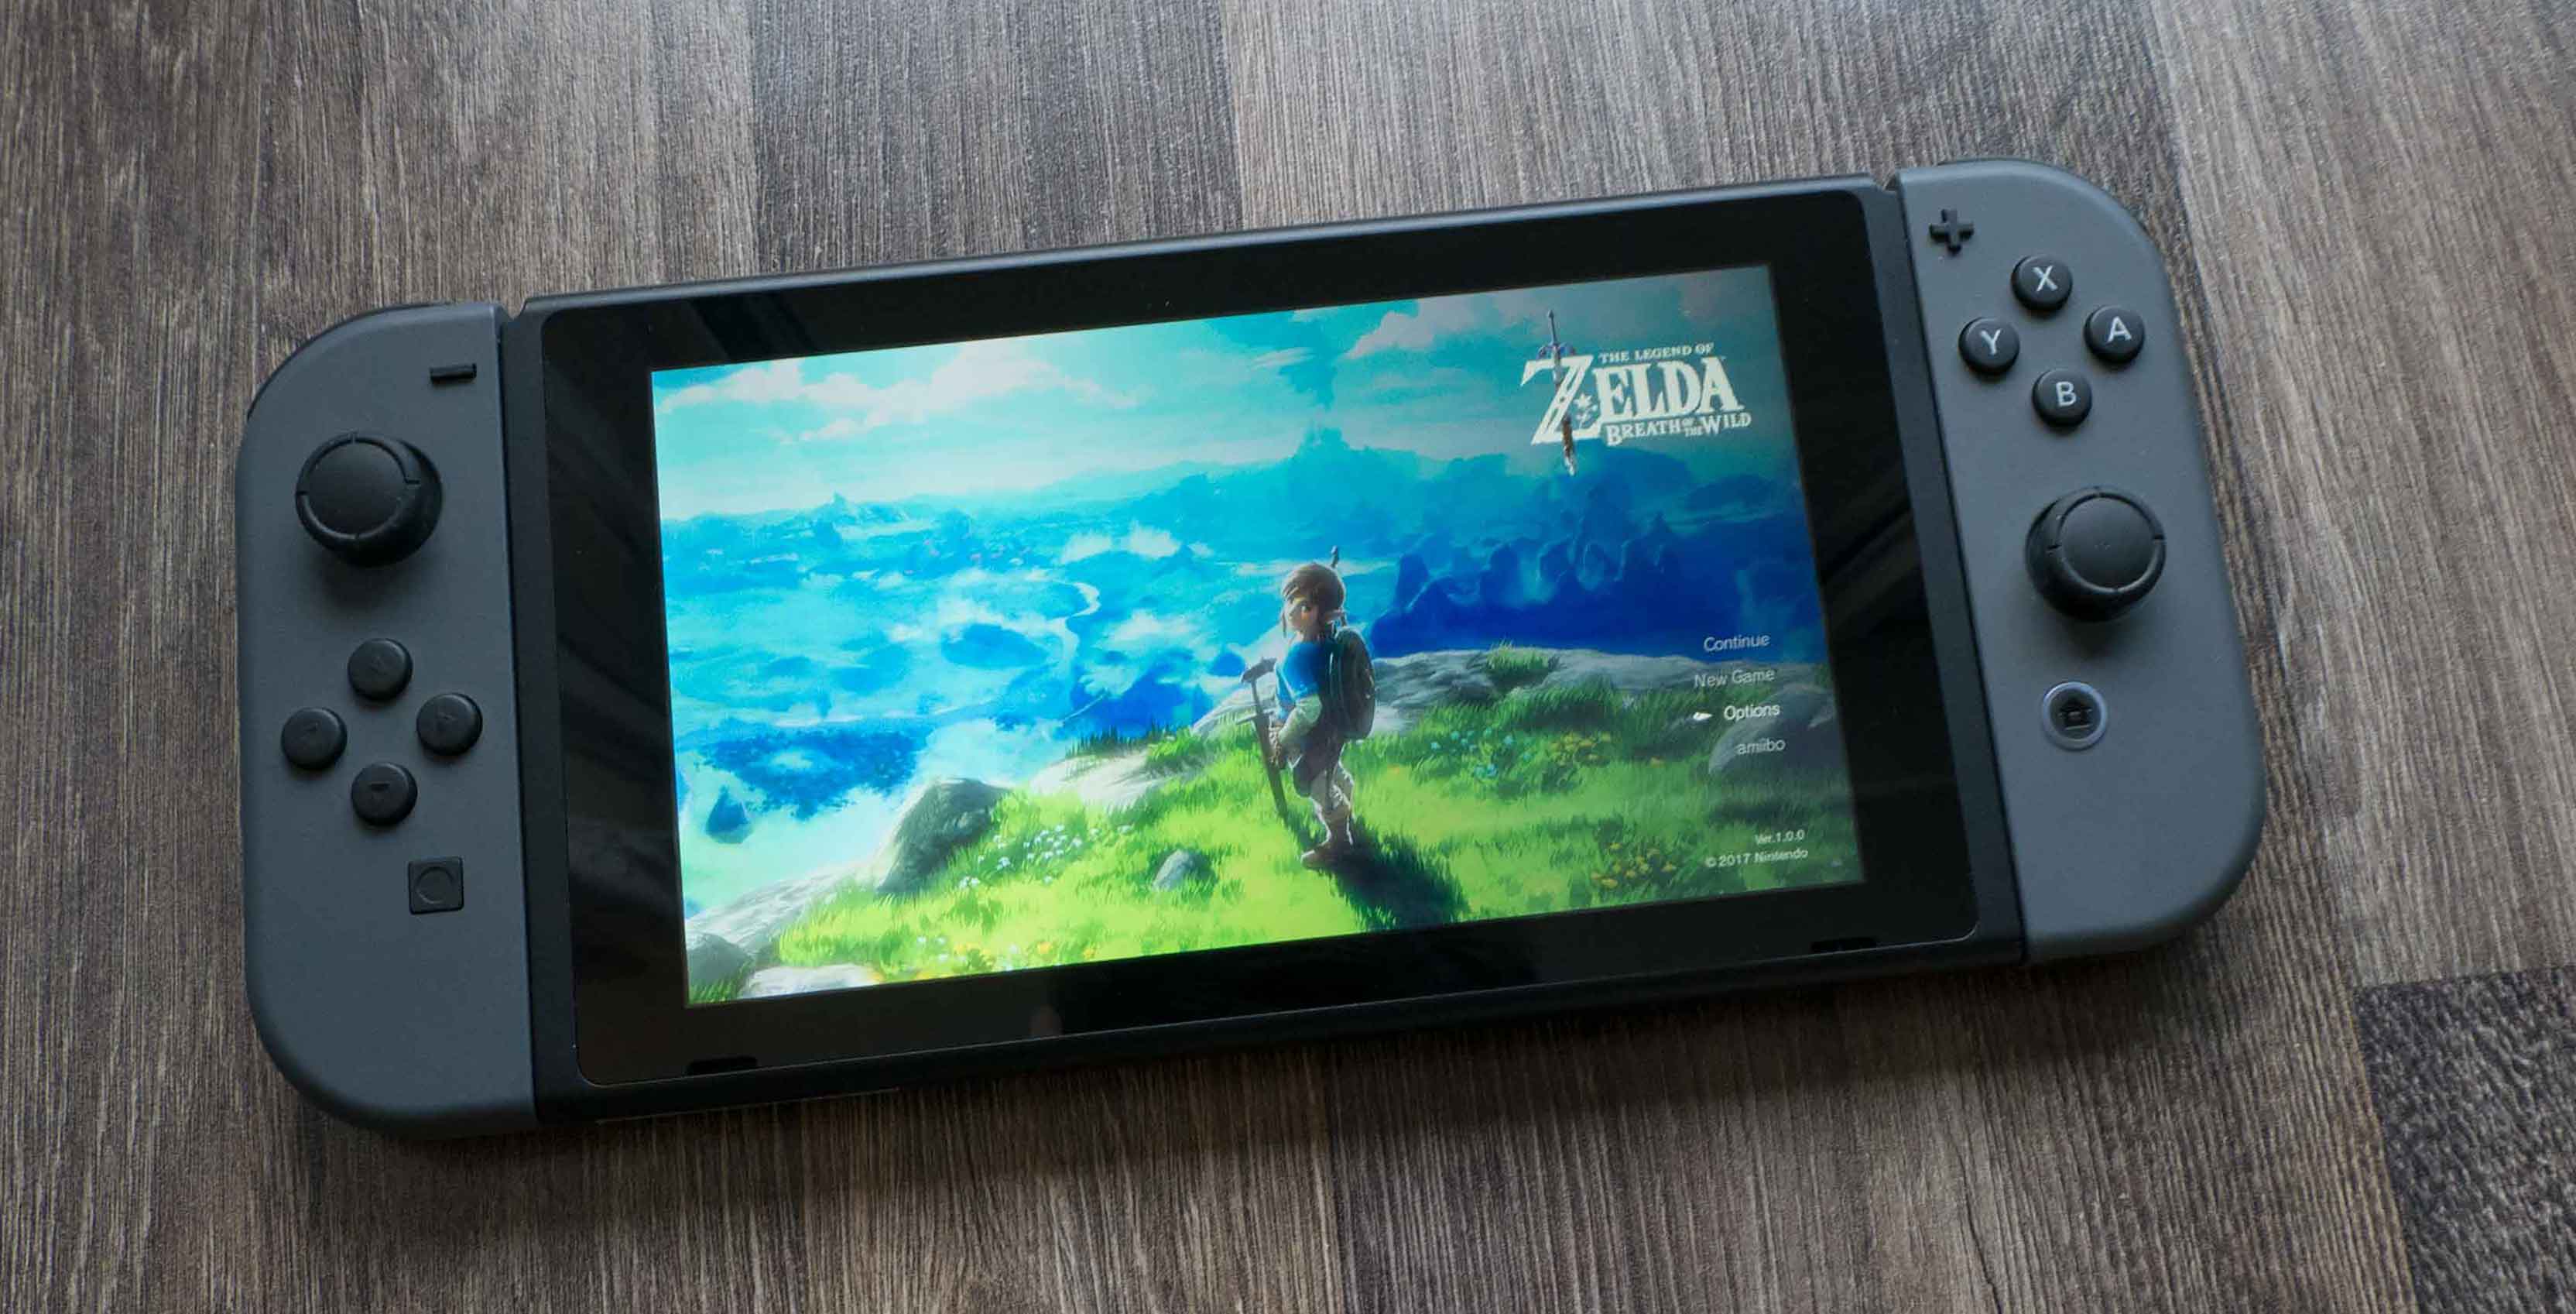 Nintendo Switch sitting on the ground with Joy-cons